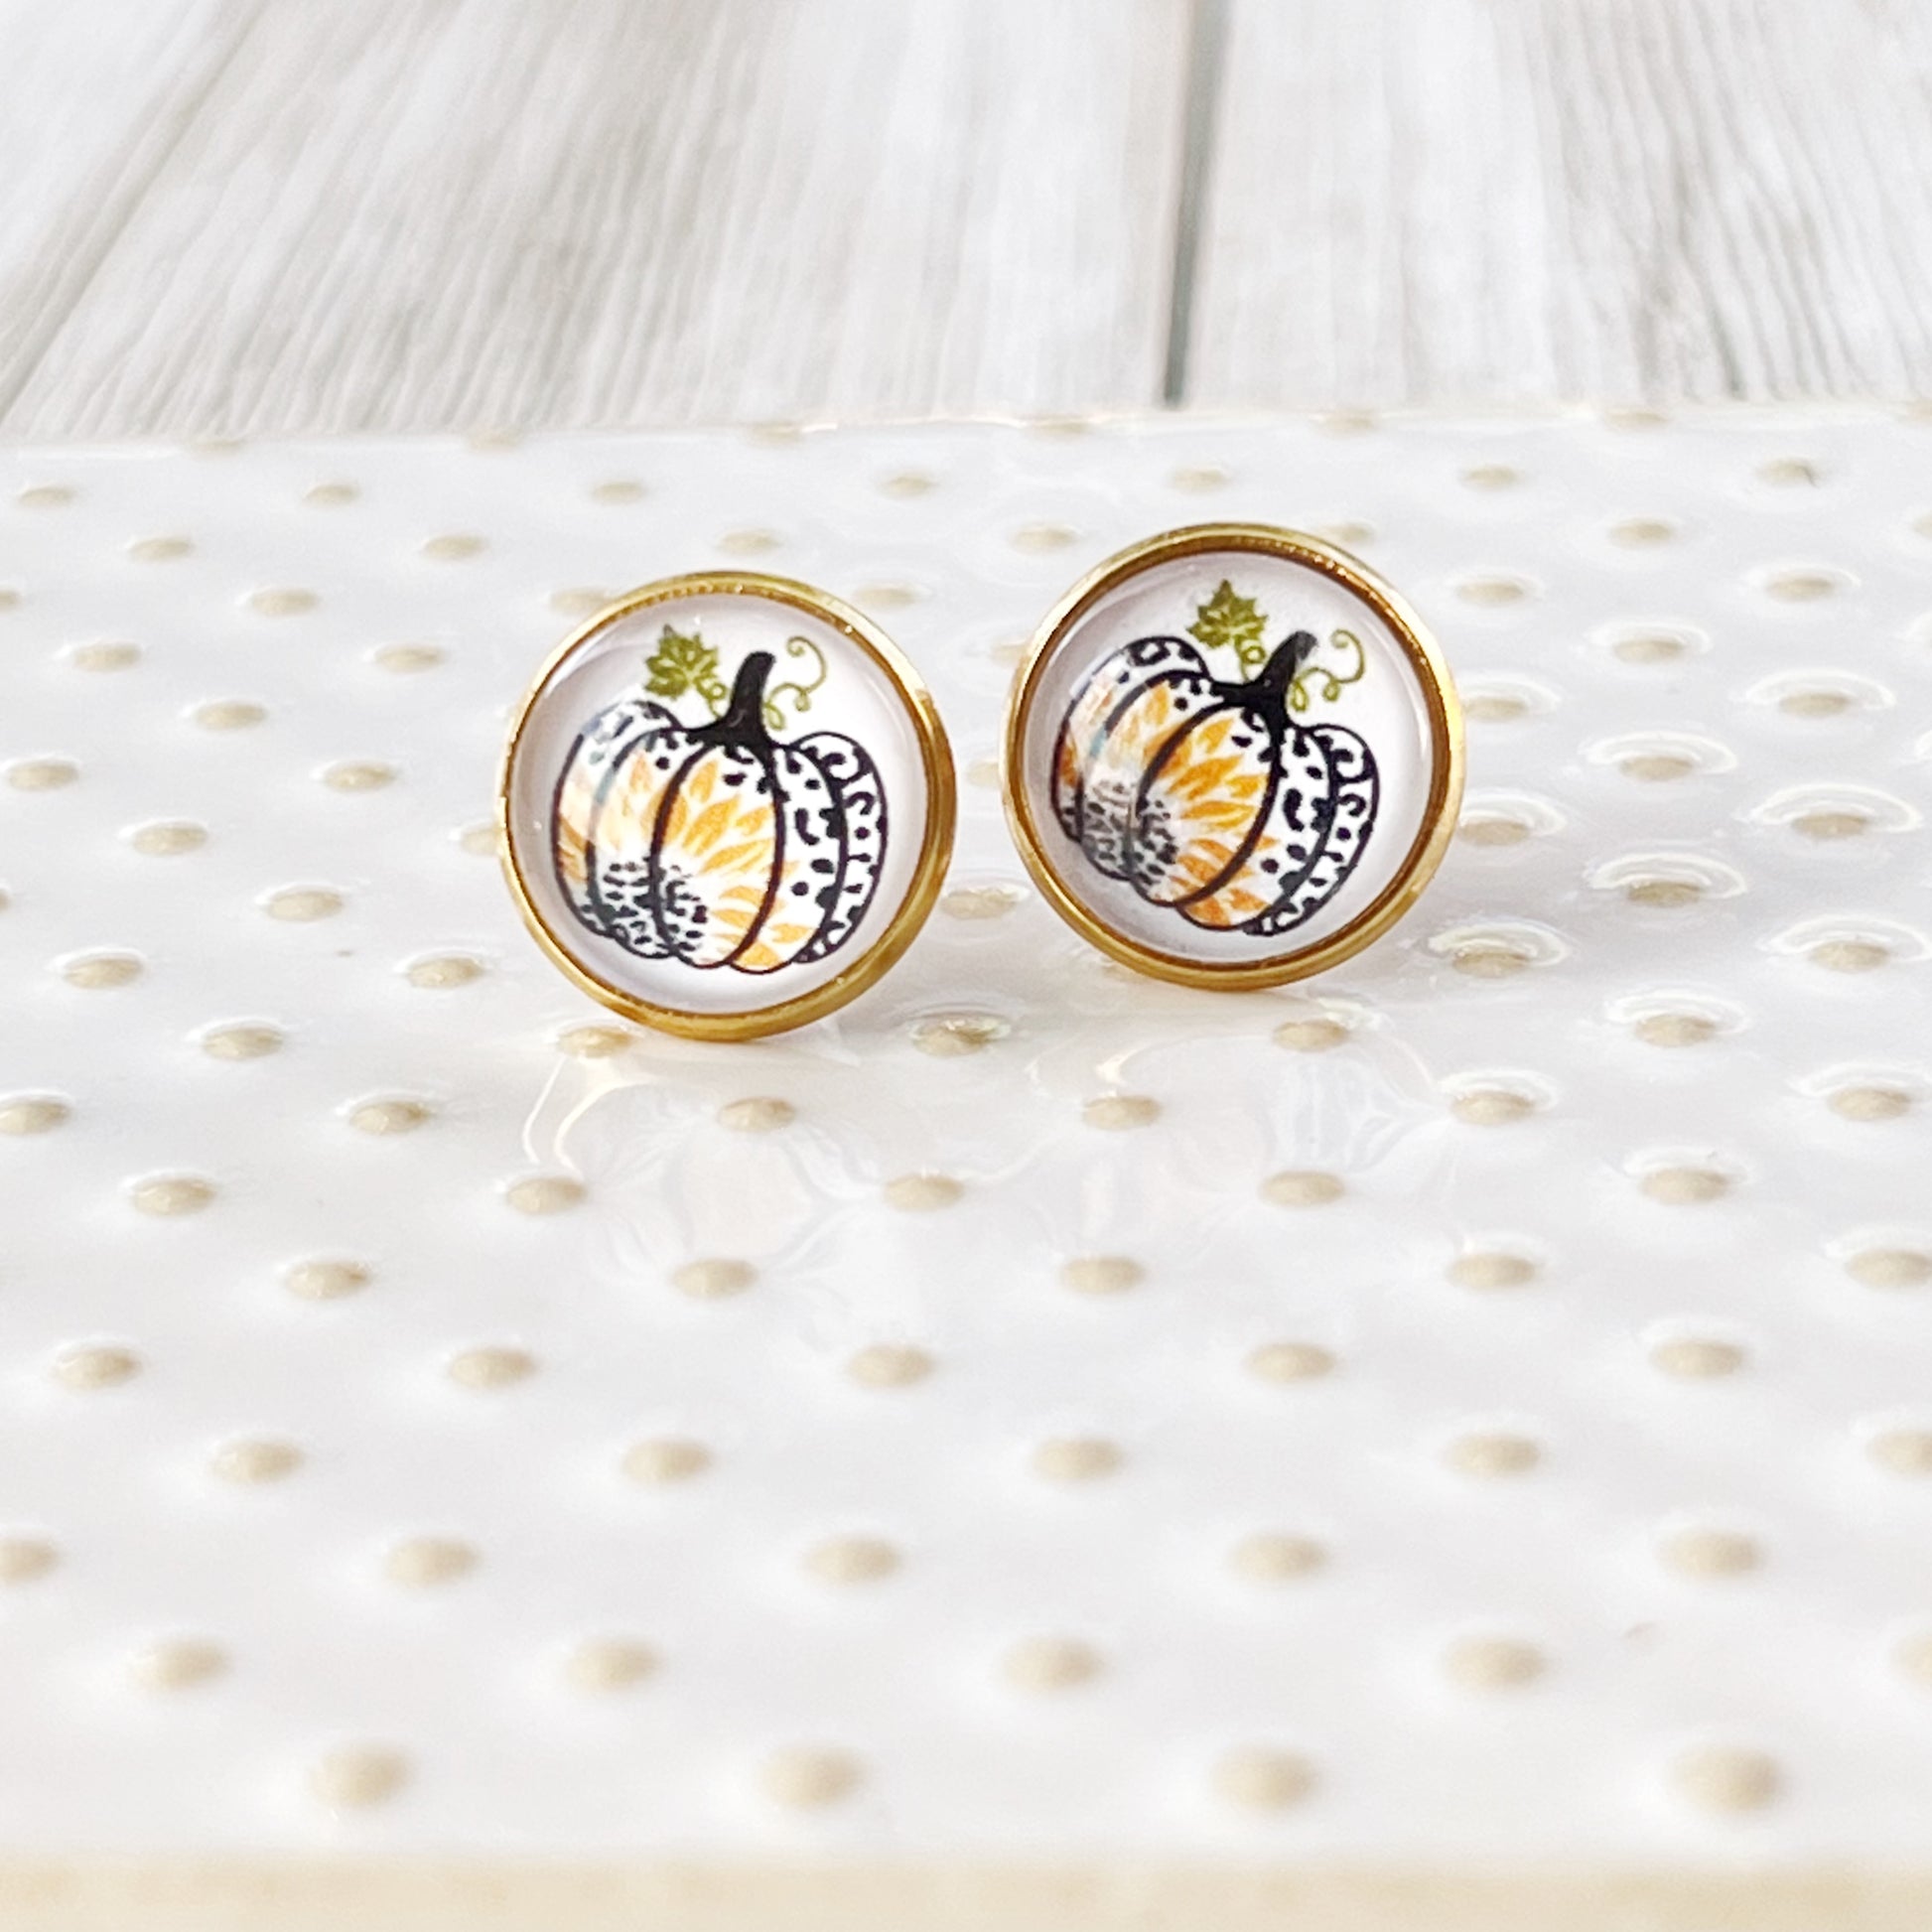 Pumpkin & Sunflower Gold Stud Earrings: Unique Autumn Accents for Your Style